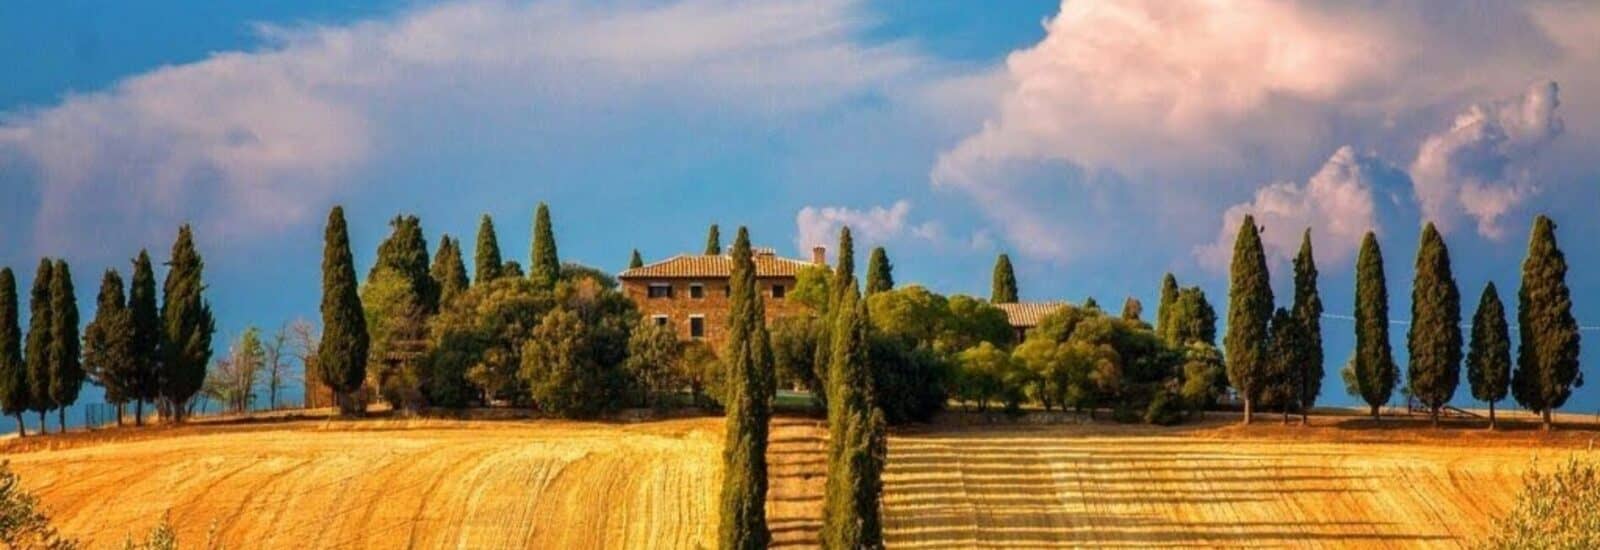 TUSCANY LIFE STYLE SERVICES -Rentals and tourist services